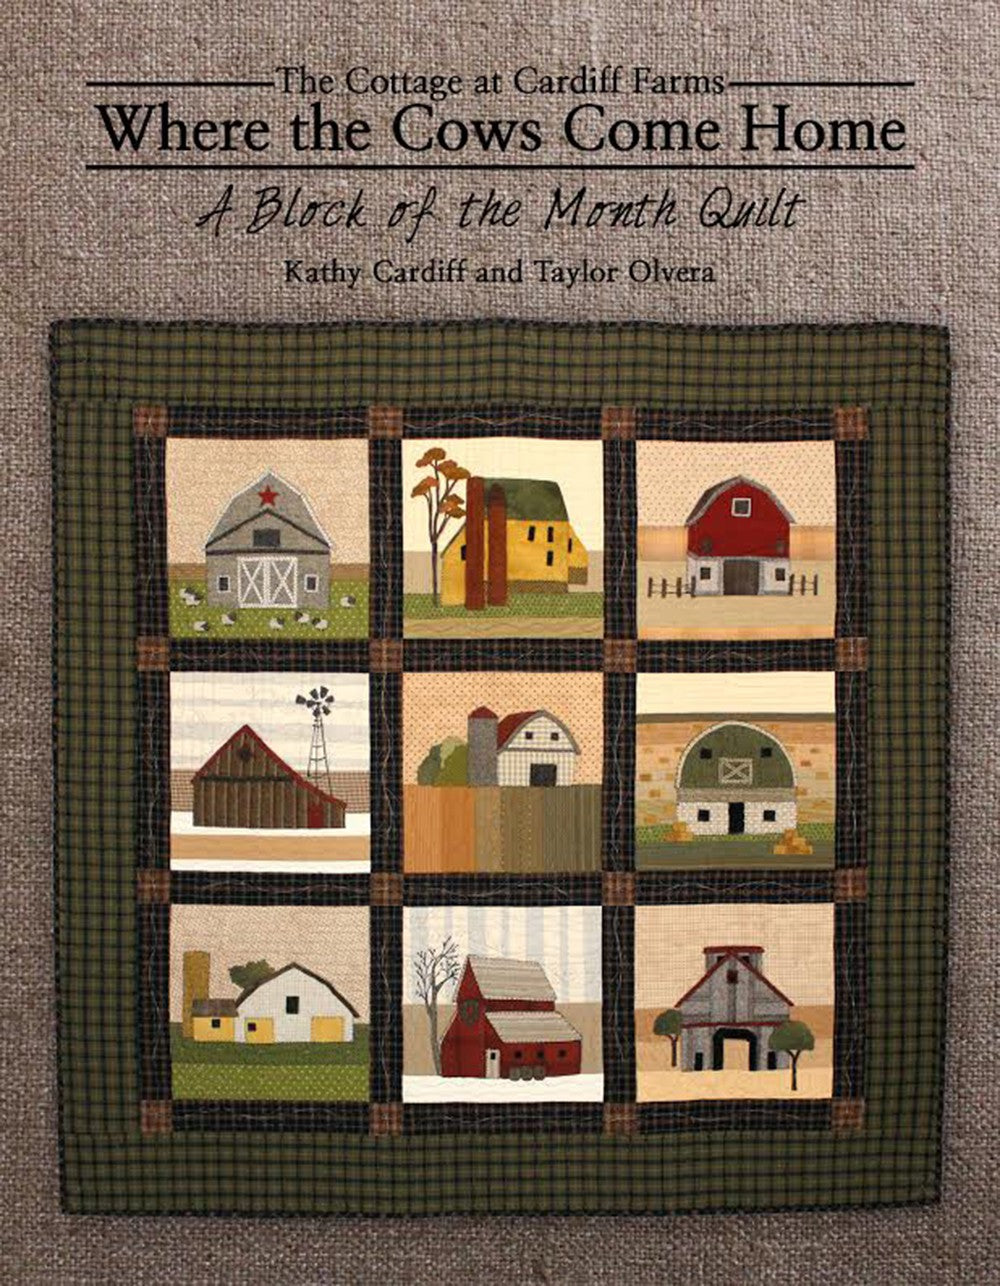 Where The Cows Come Home Quilt Pattern Book by Kathy Cardiff and Taylor Olvera for Cottage at Cardiff Farms